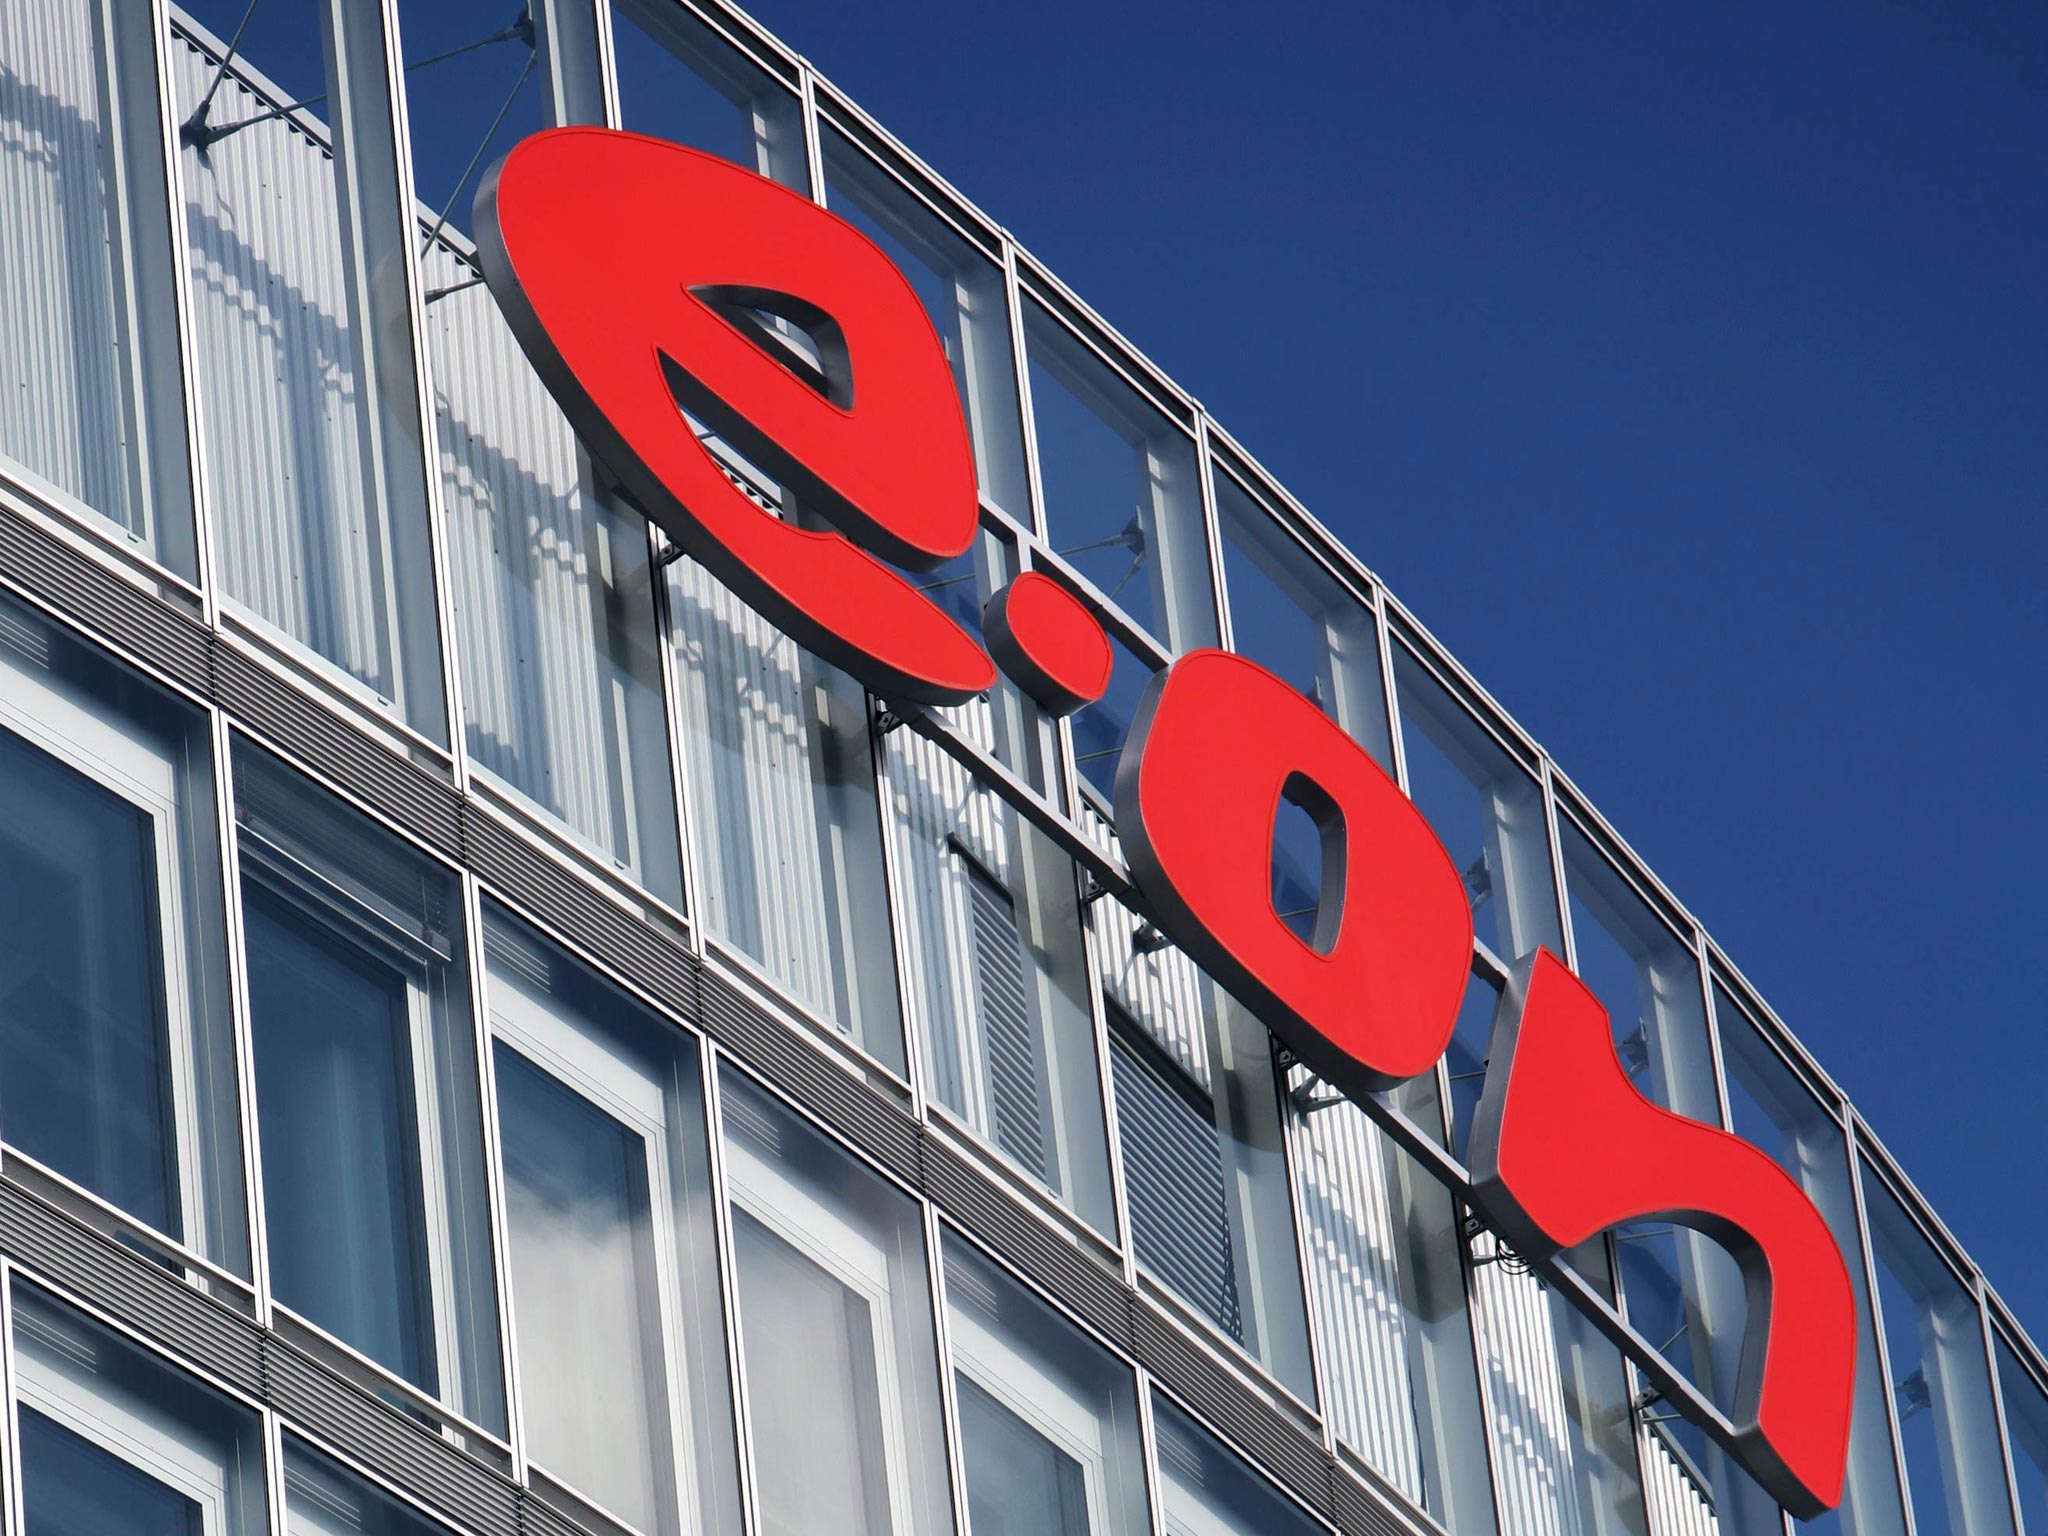 E.On said it had to take account of more than just wholesale costs when setting prices